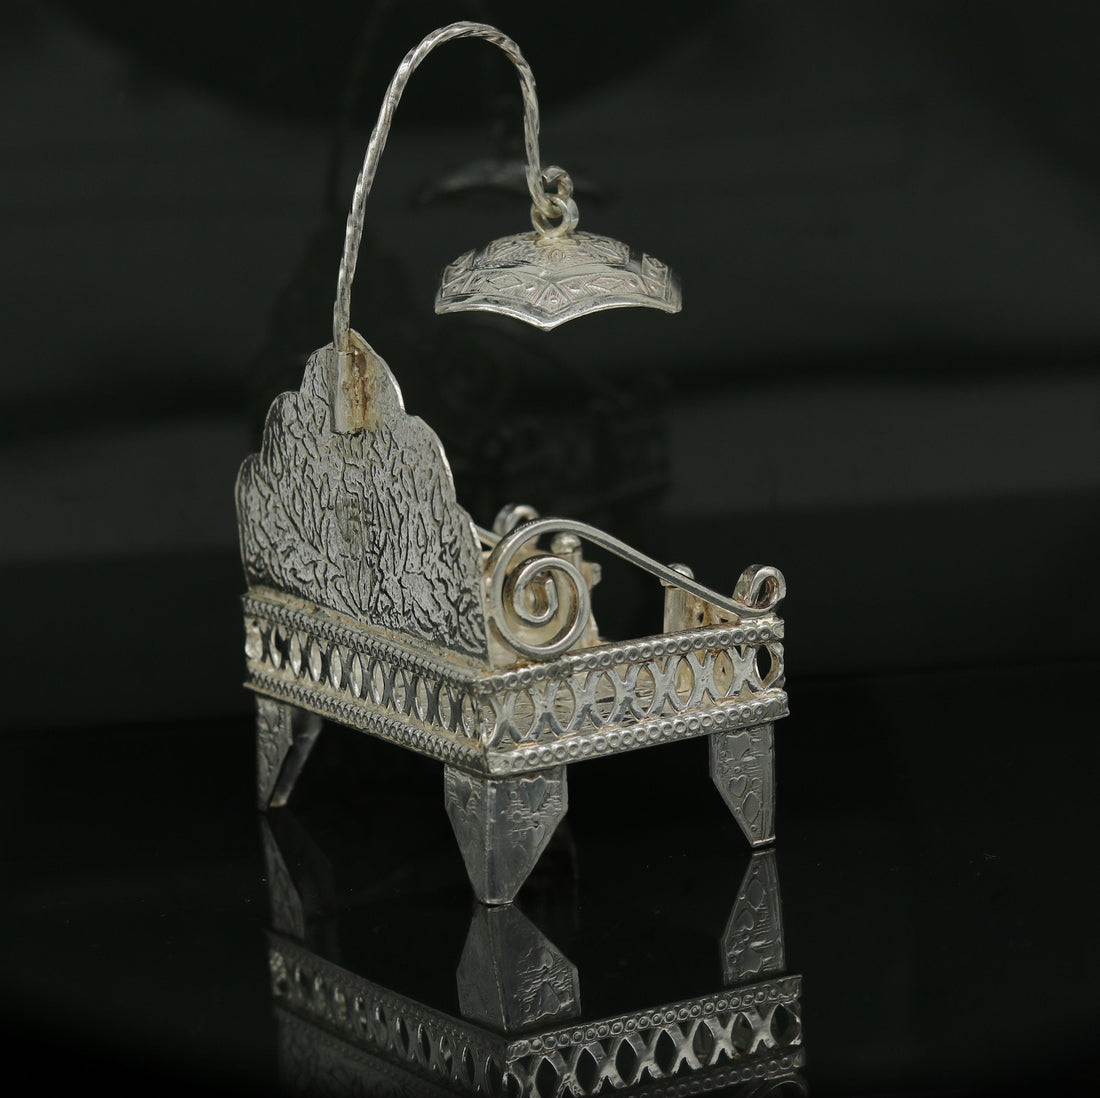 Sterling silver handmade amazing design home mini temple god "the throne"  , amazing handcrafting work home decor temple art figurine  sst13 - TRIBAL ORNAMENTS